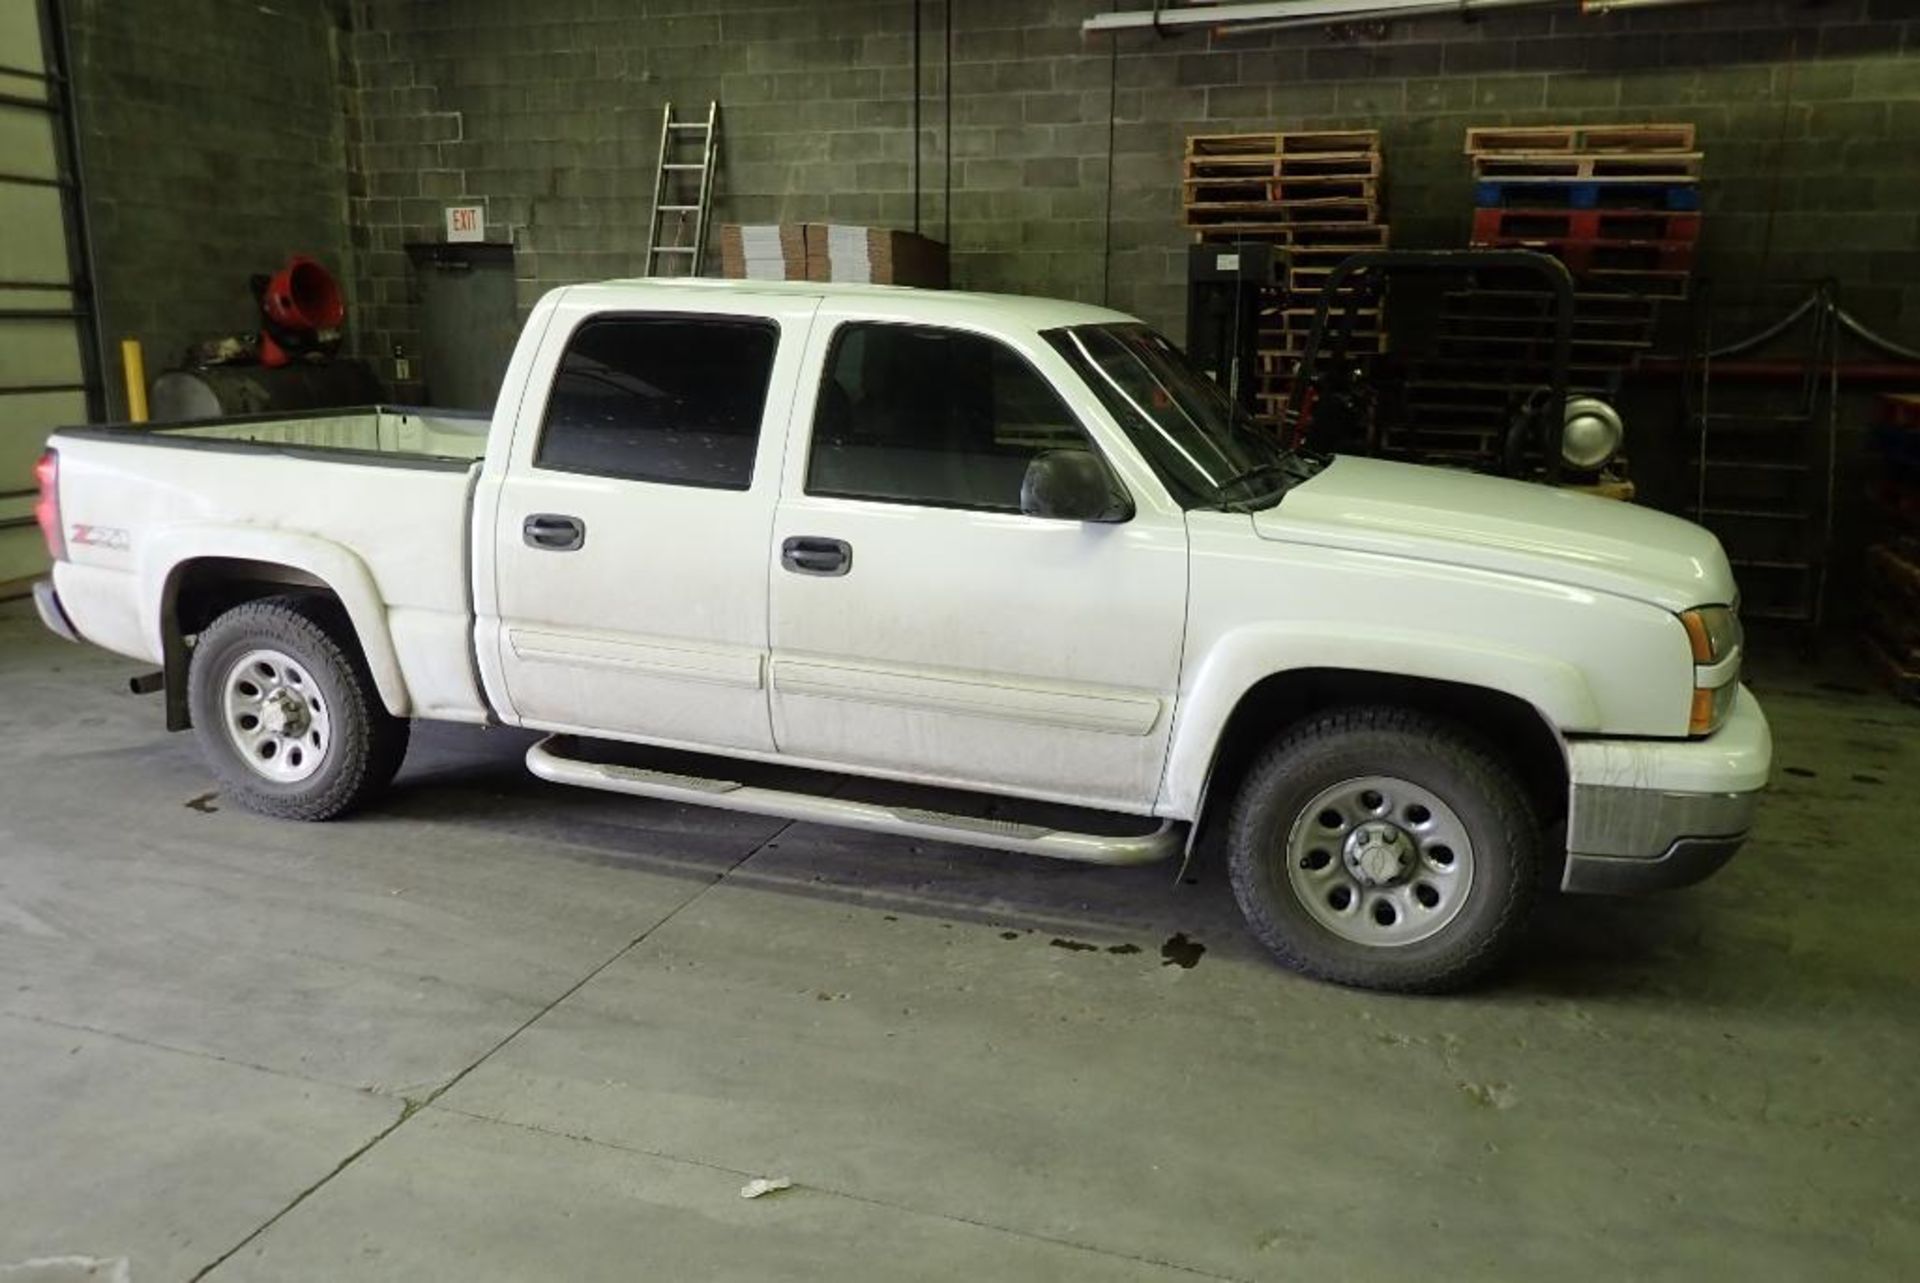 2006 Chevy 1/2 ton pickup - Image 2 of 16